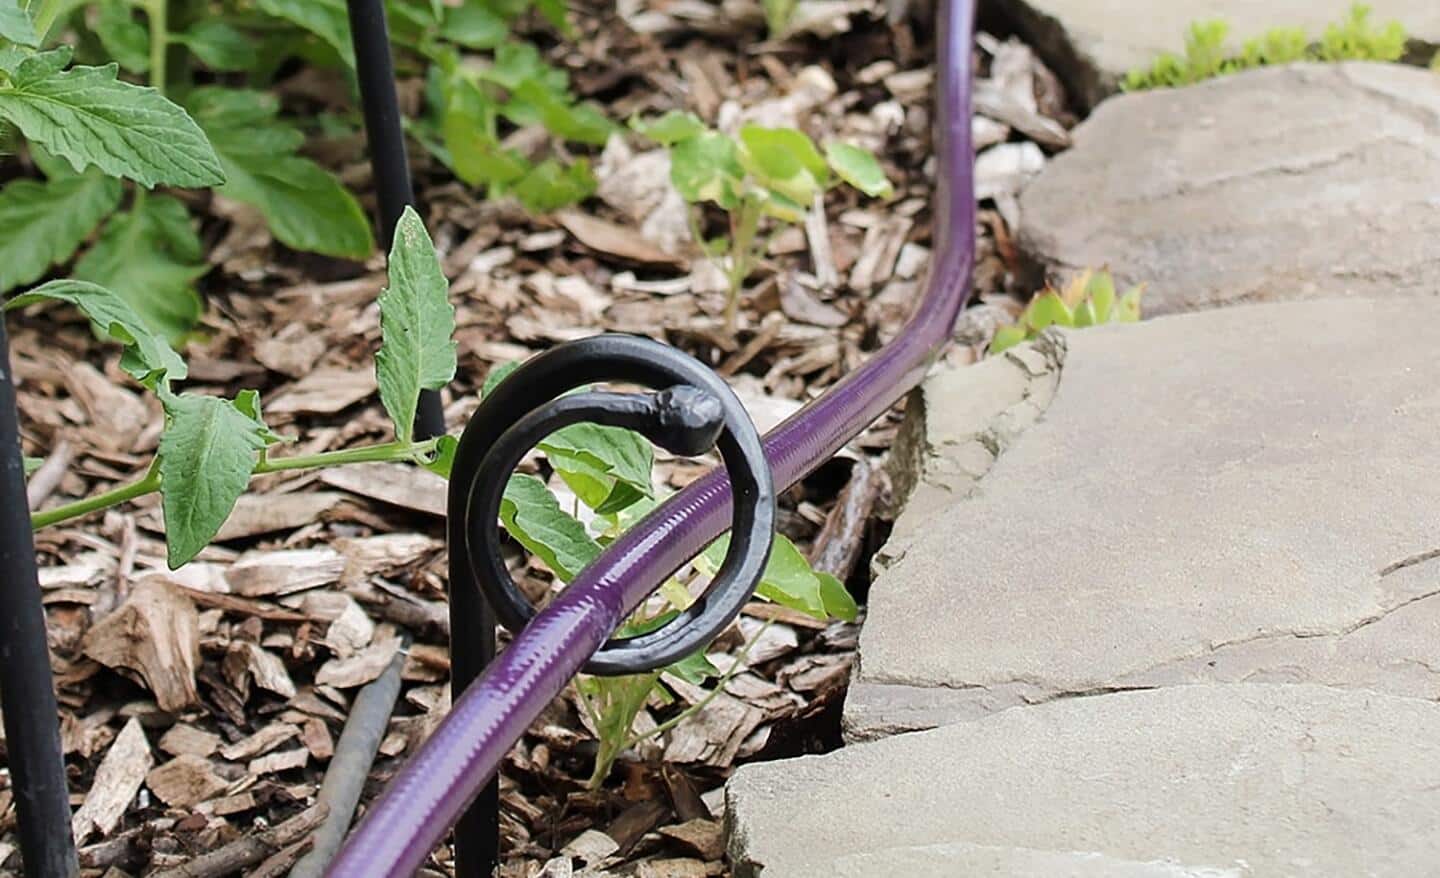 A metal hose guide holds a hose in place along a path